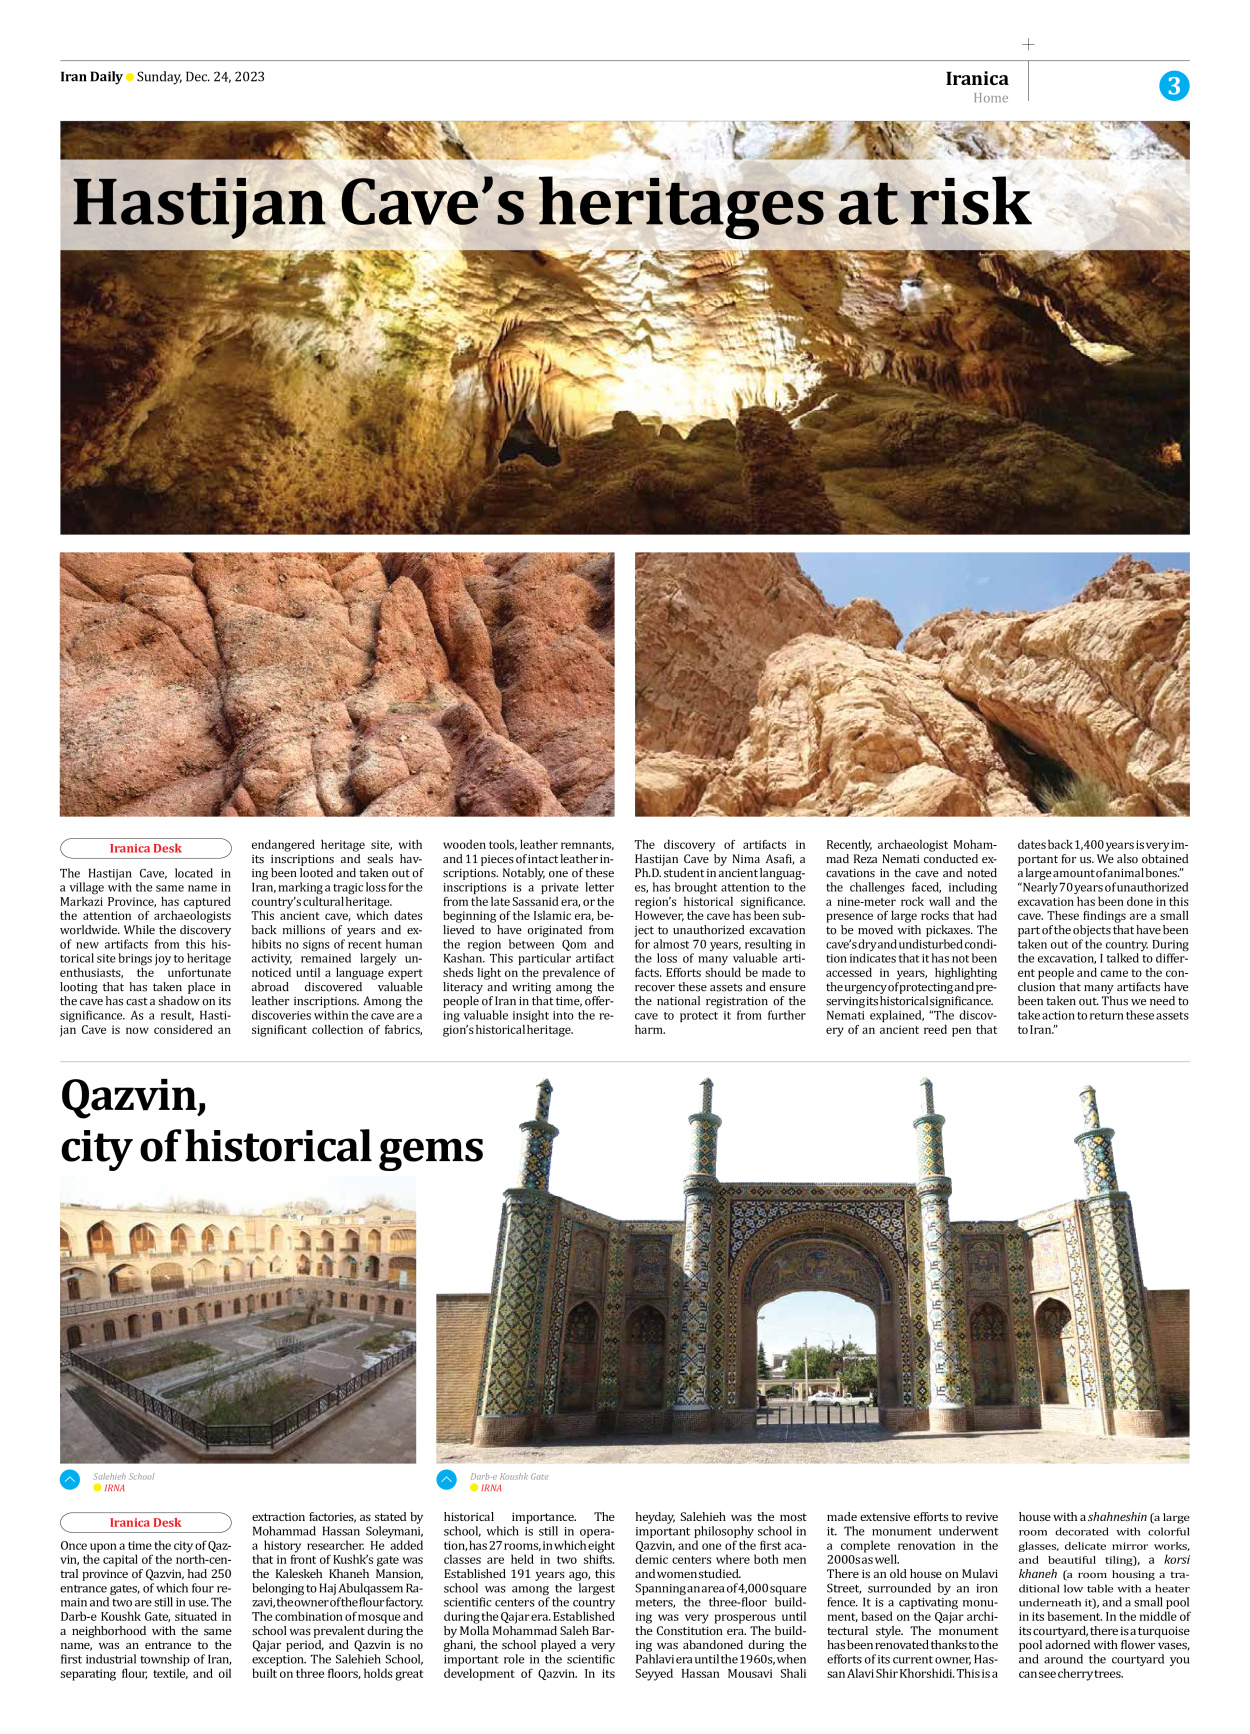 Iran Daily - Number Seven Thousand Four Hundred and Sixty Six - 24 December 2023 - Page 3